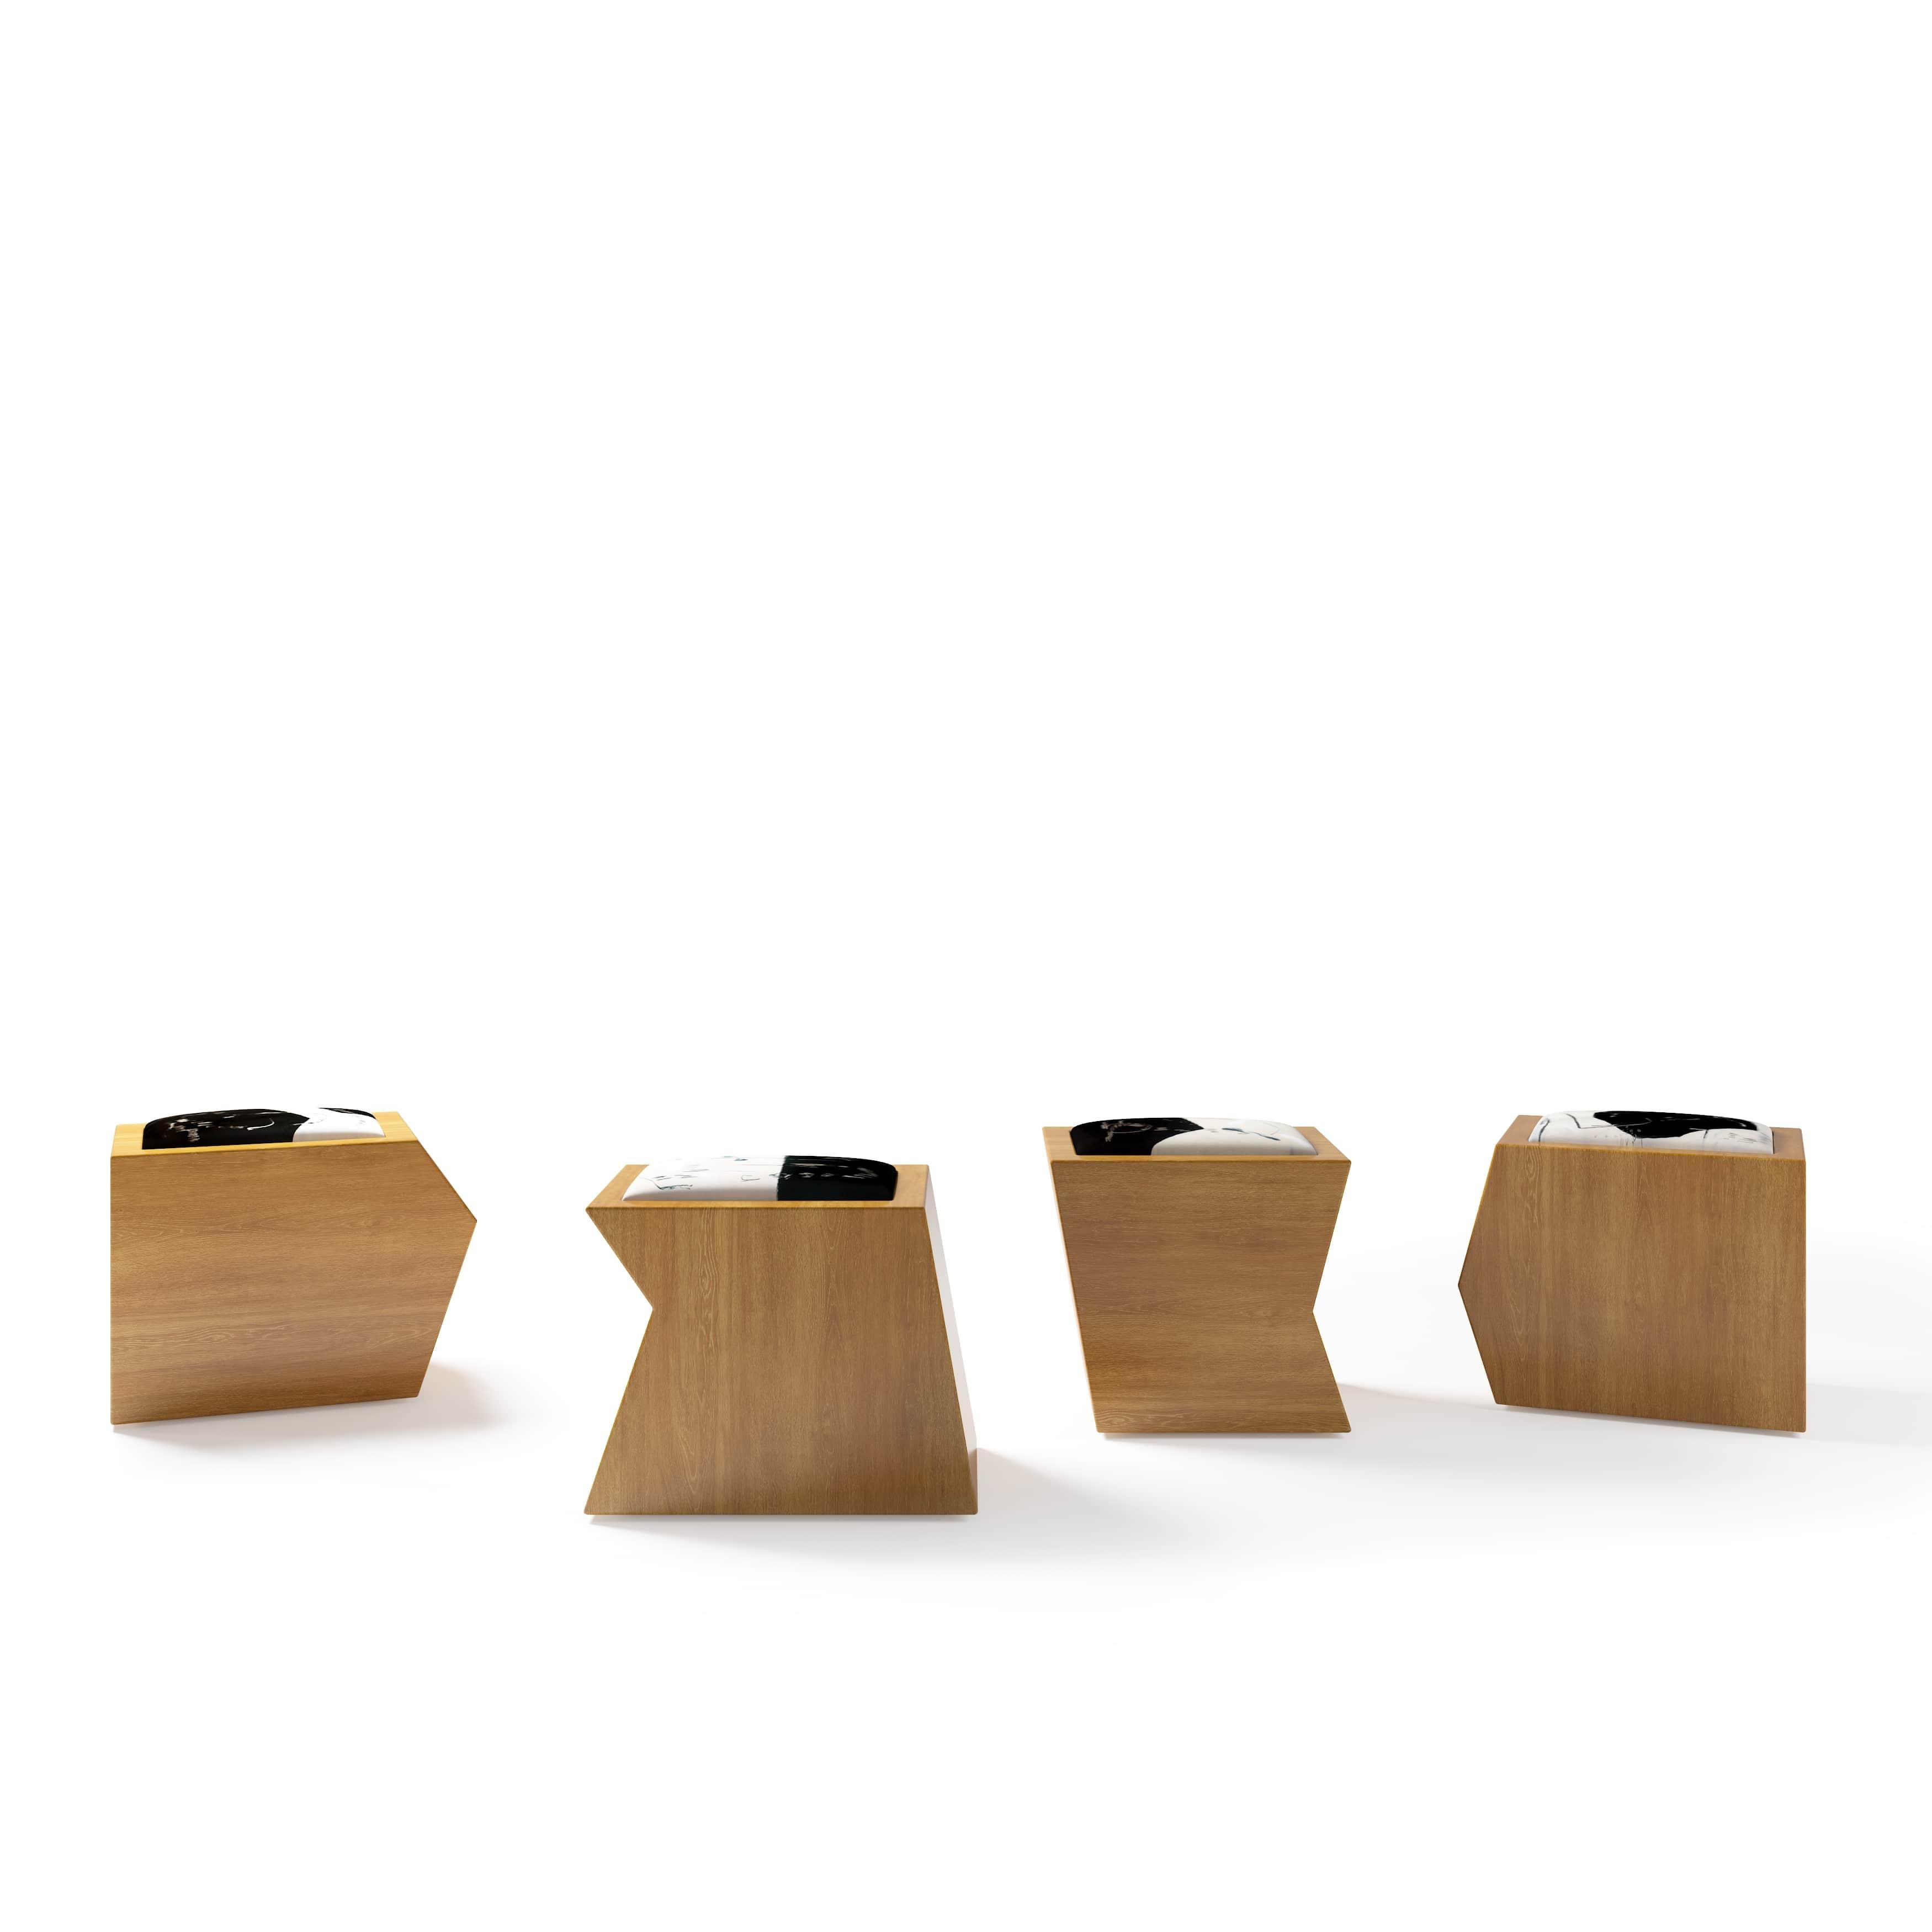 Tang is composed of the geometric lines of the Chinese puzzle game Tangram. Made of wood, the bench can become four single seats - due to its cuts and geometric shapes. Each seat features the paintings of the abstract artist Yuan-Wen Wang, reprised